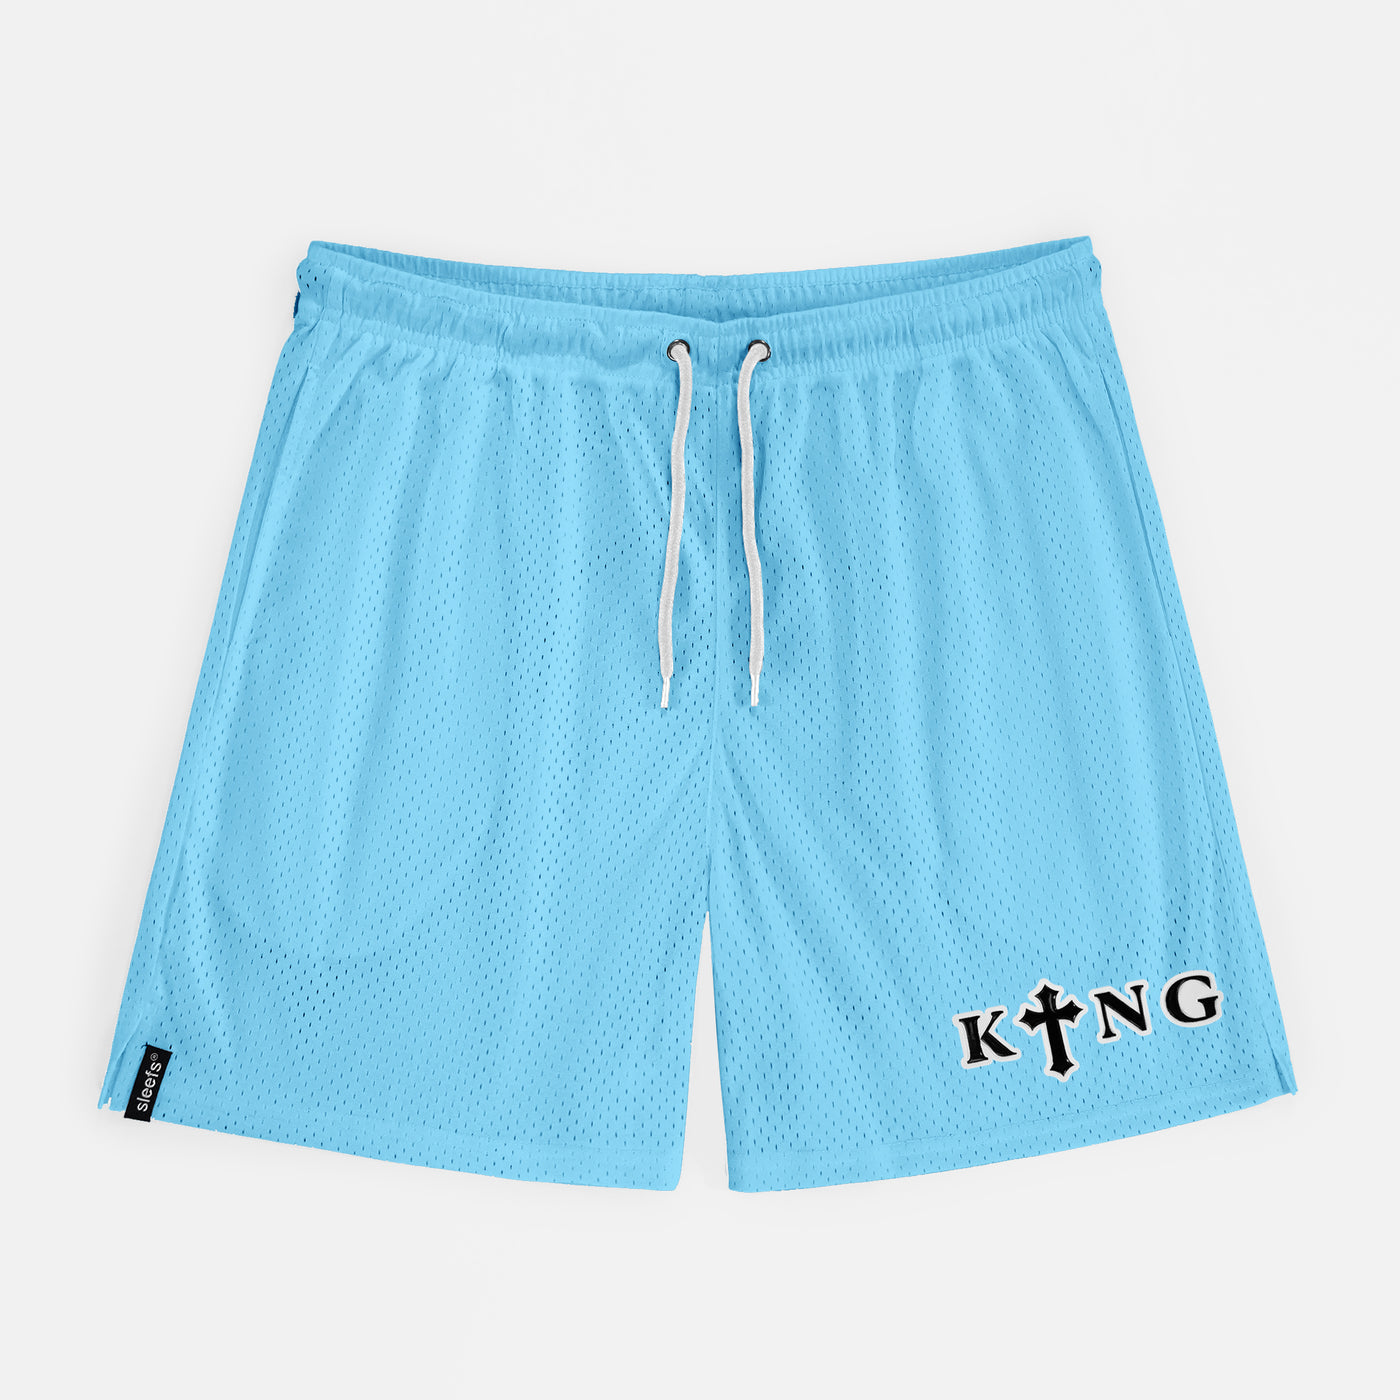 King Gothic Cross Patch Shorts - 7"